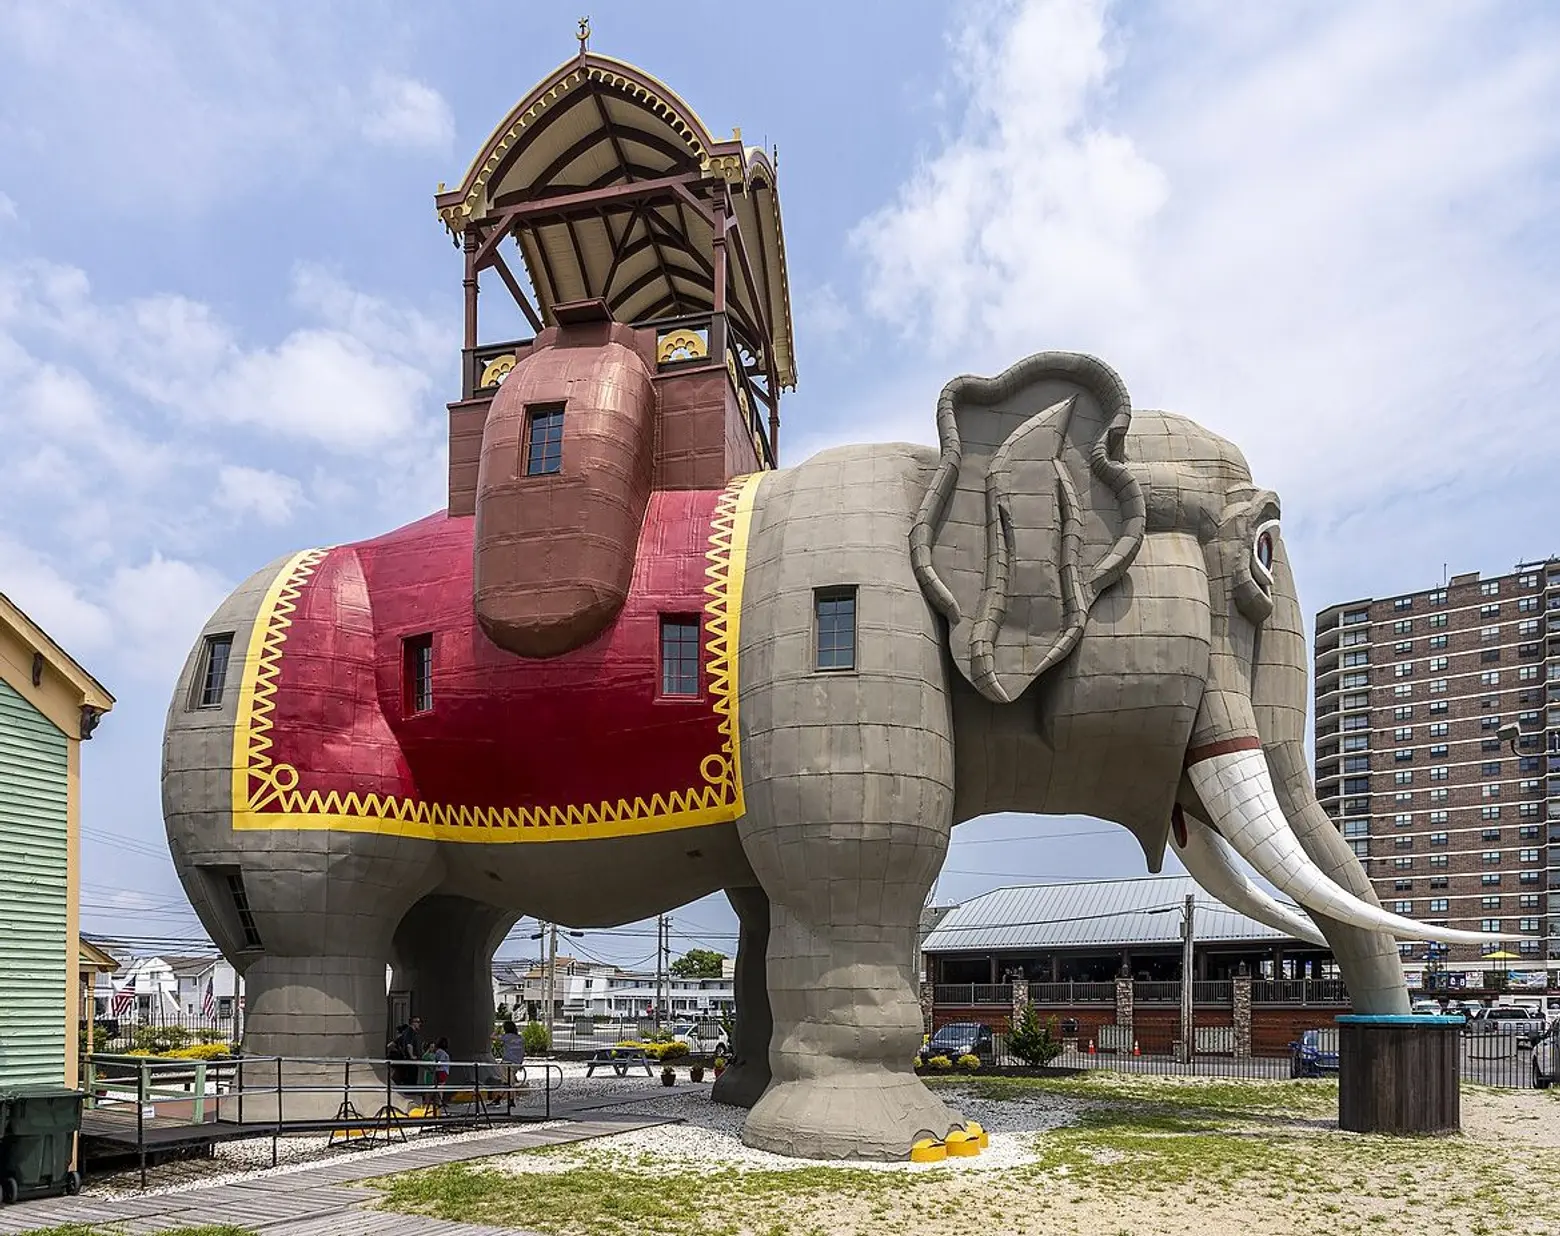 On the Jersey Shore, you can spend the night inside a 90-ton elephant